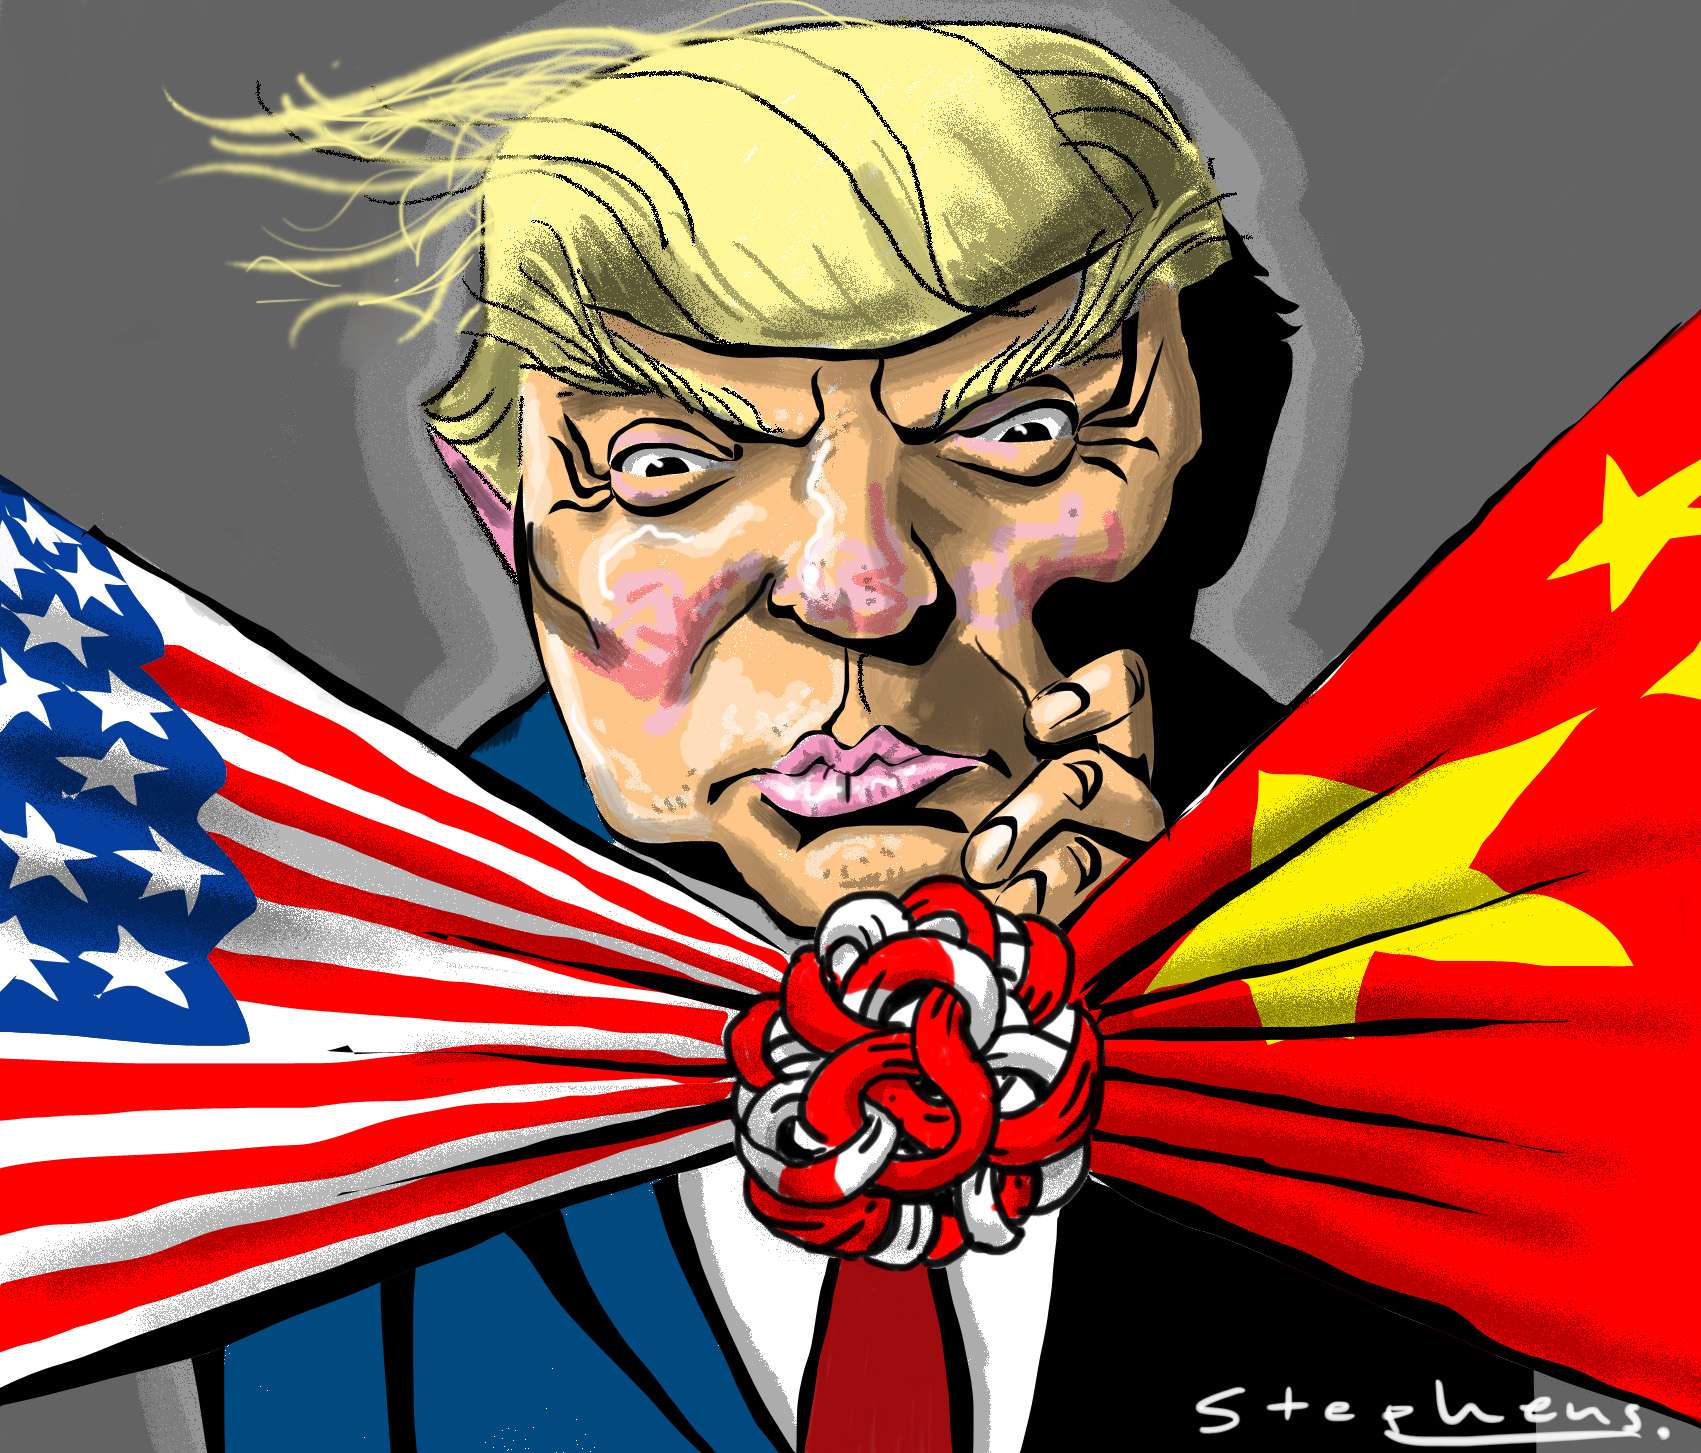 Yun Tang sees uncertain times ahead for Washington’s relations with Beijing under Donald Trump’s hard-line White House, but the signs are that wisdom will prevail